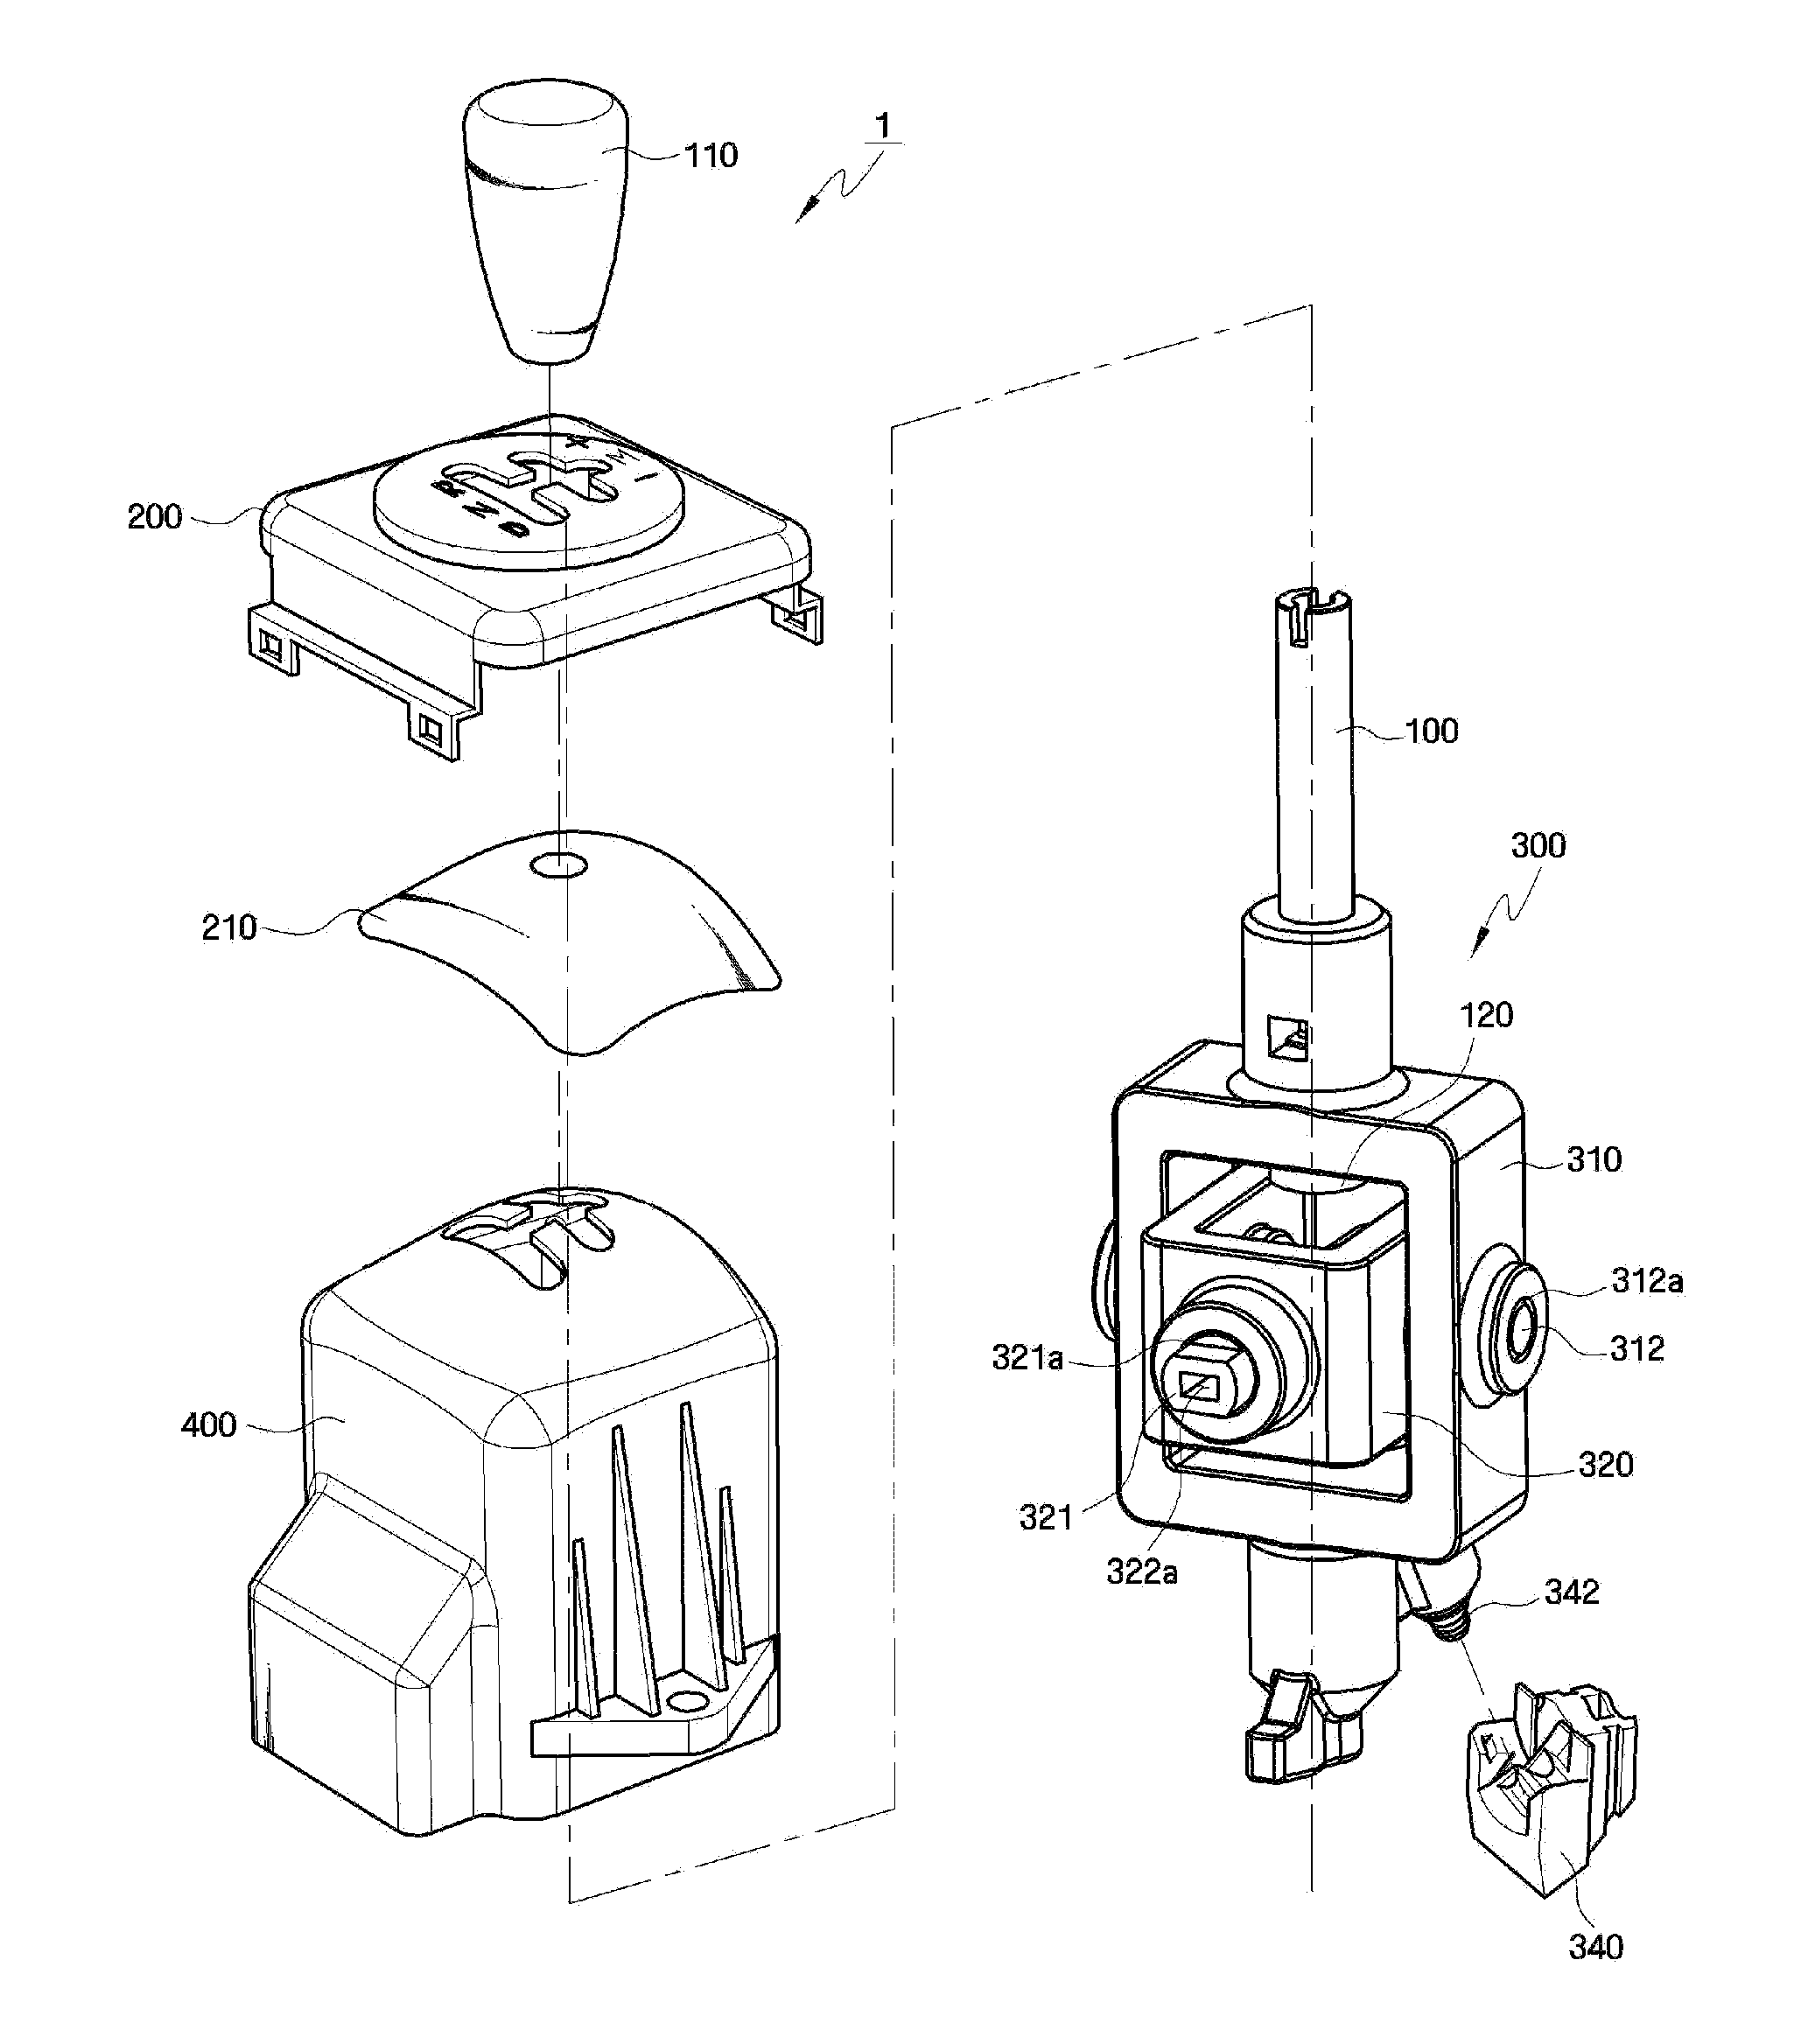 Apparatus for electronically controllable transmission